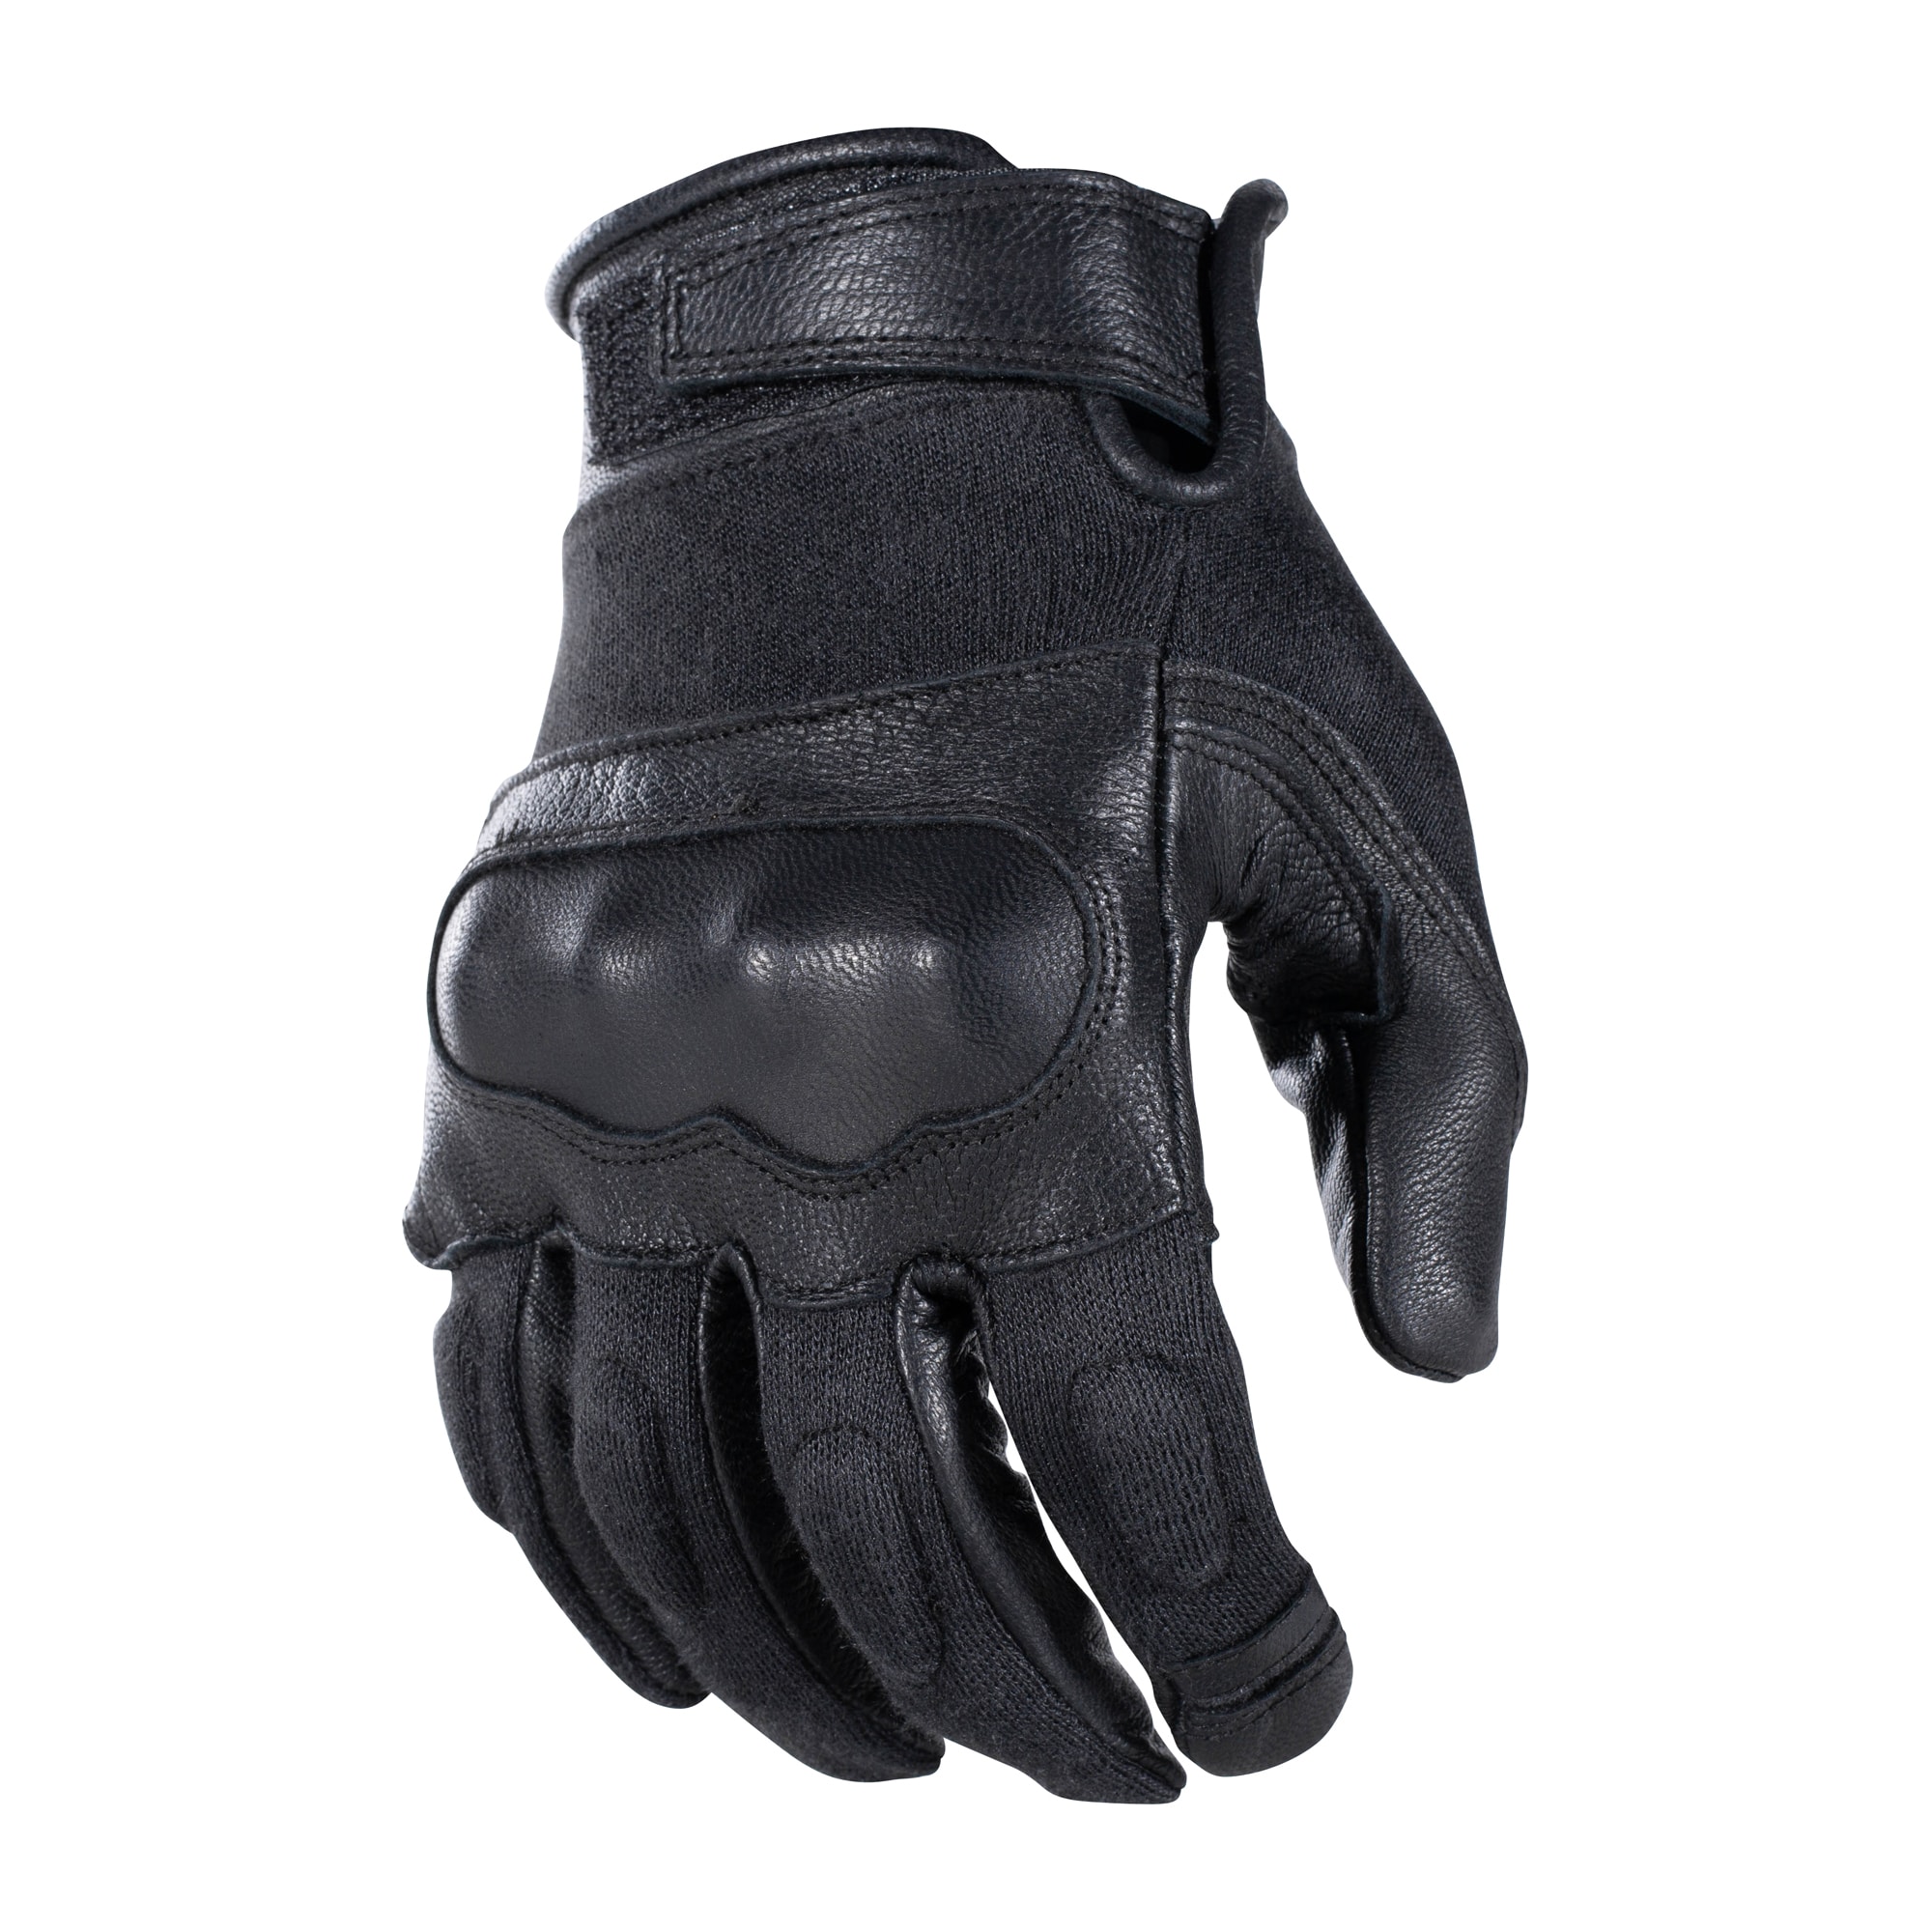 Mil-Tec Tactical Gloves Leather Mens Military Shooting Airsoft Gear Black